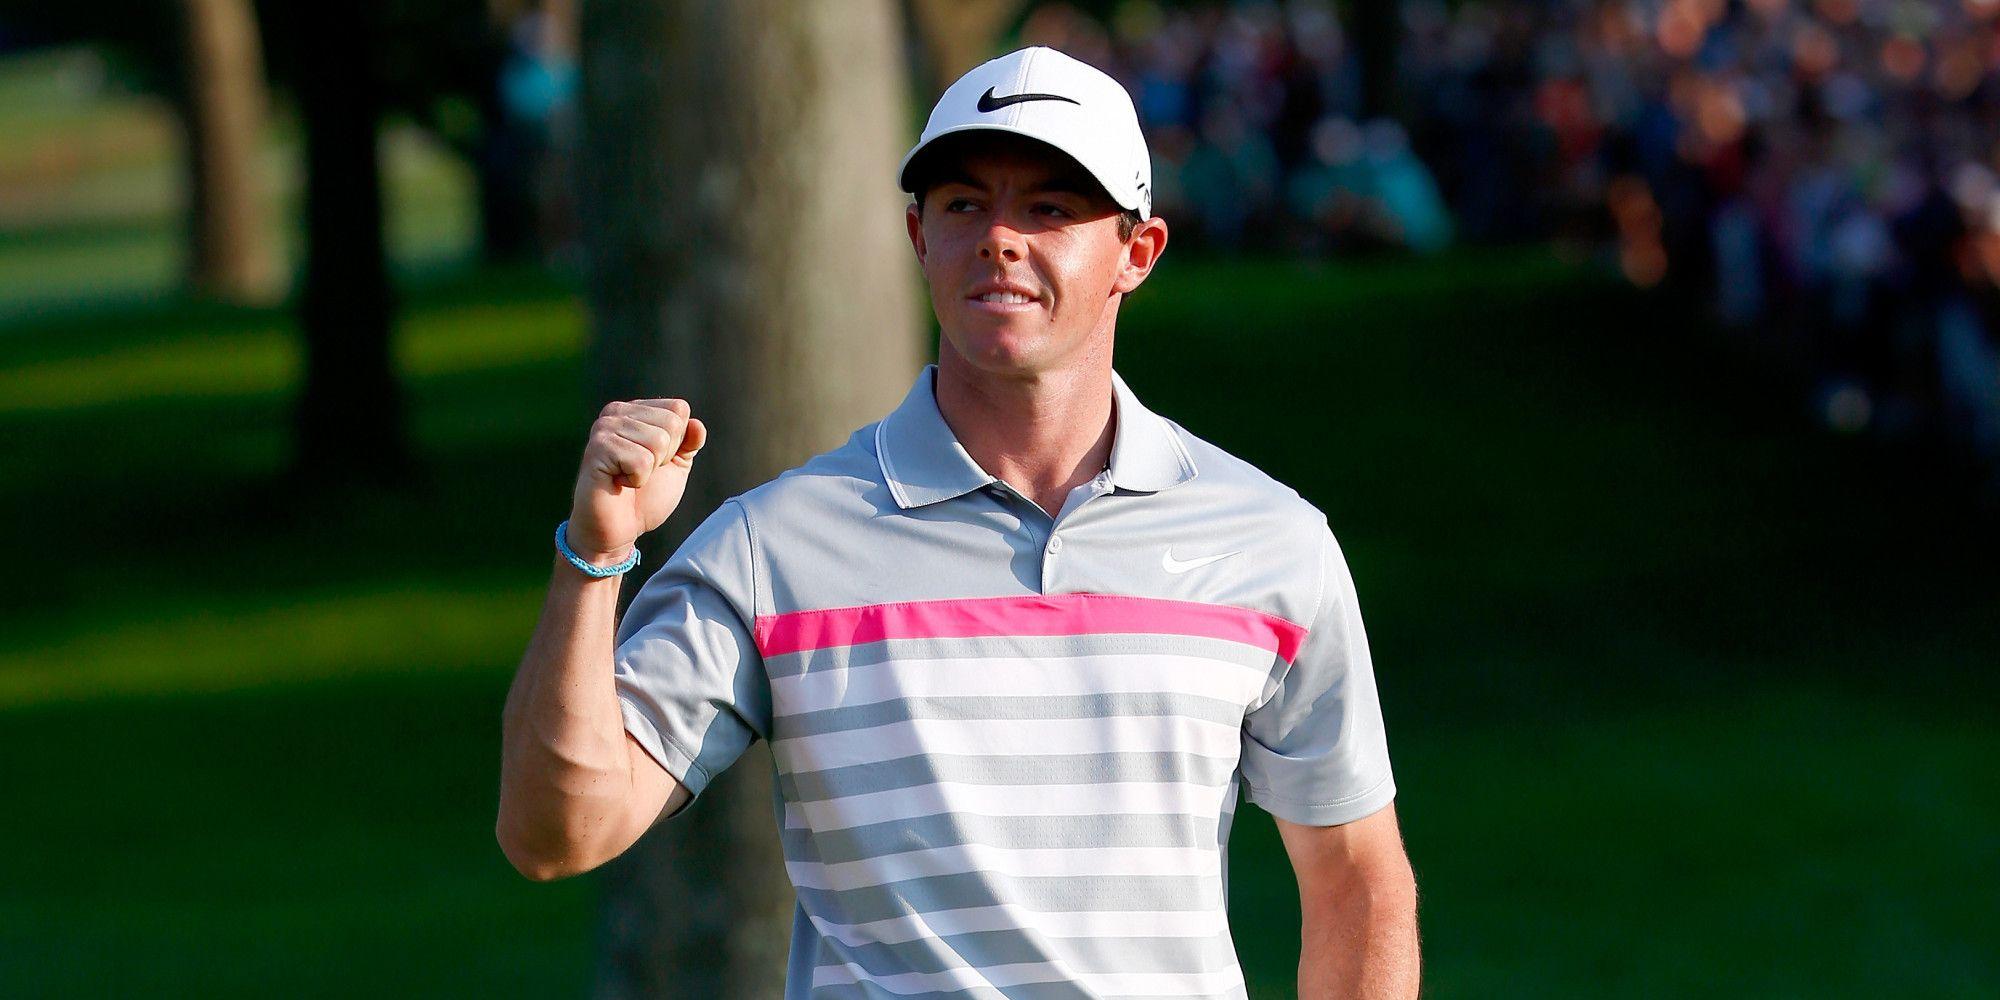 Is Rory McIlroy ready to roar again in 2018?